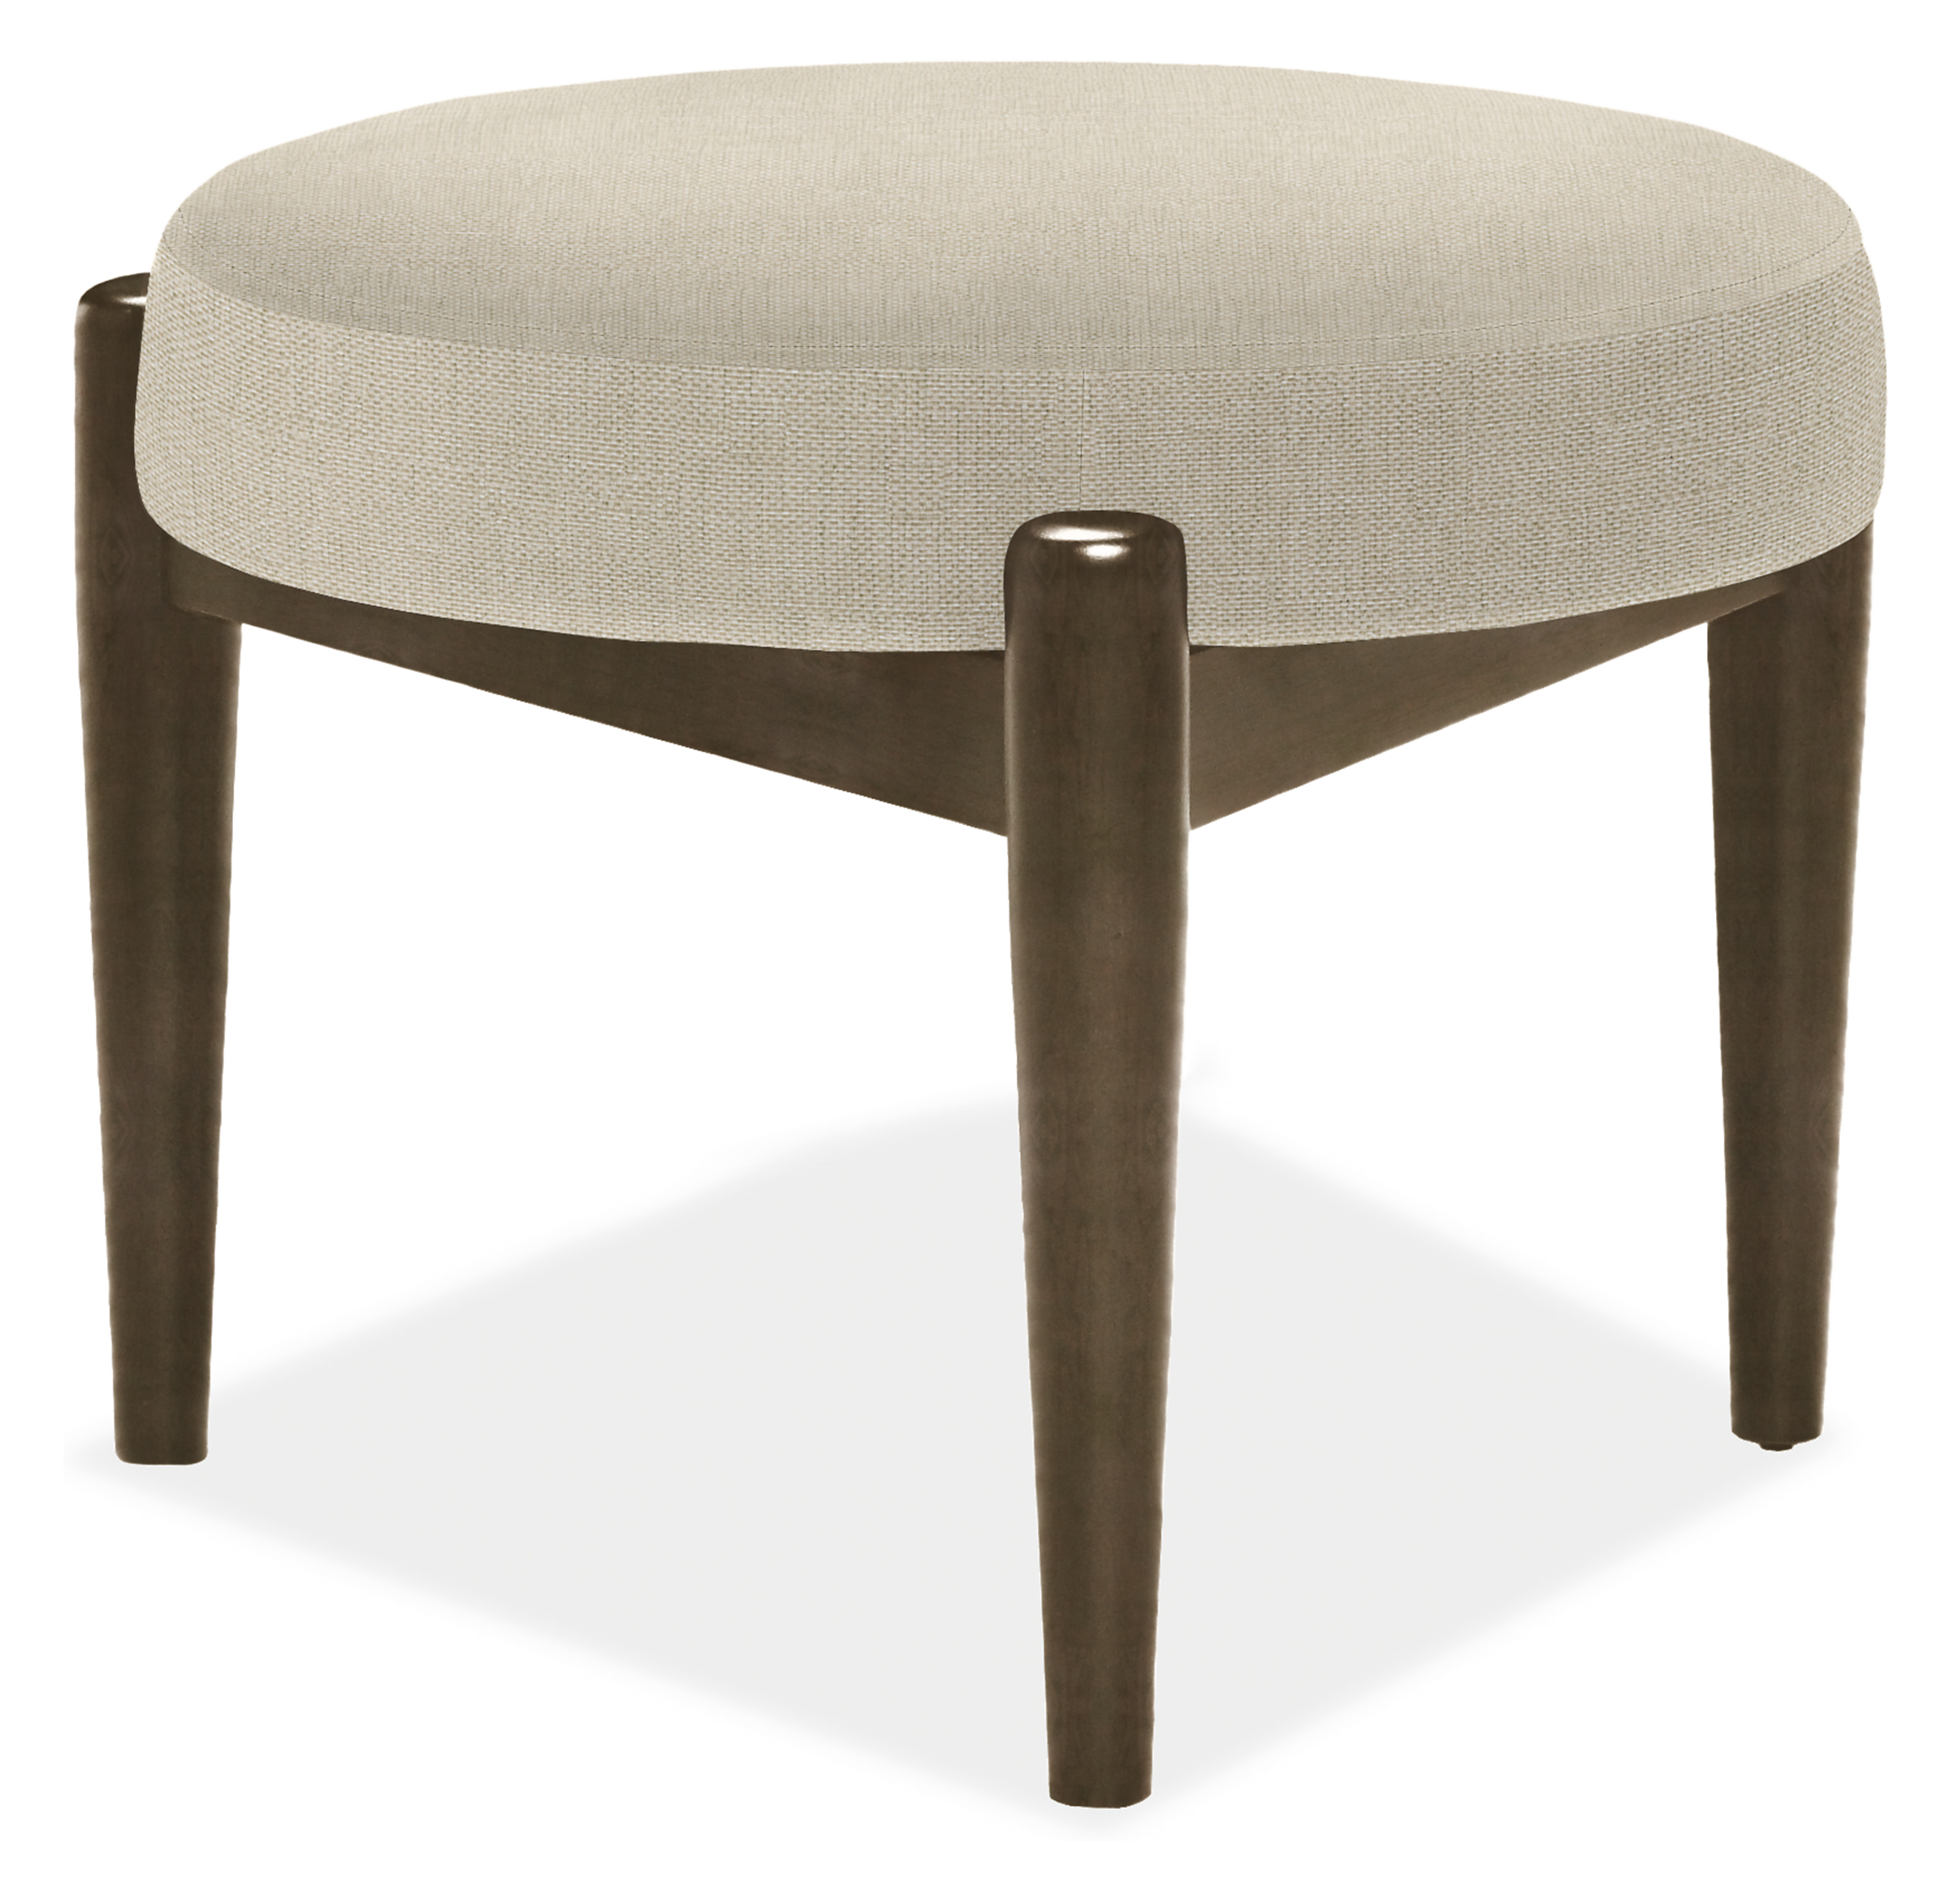 Murphy 25 diam 17h Round Stool in Sumner Linen with Charcoal Base